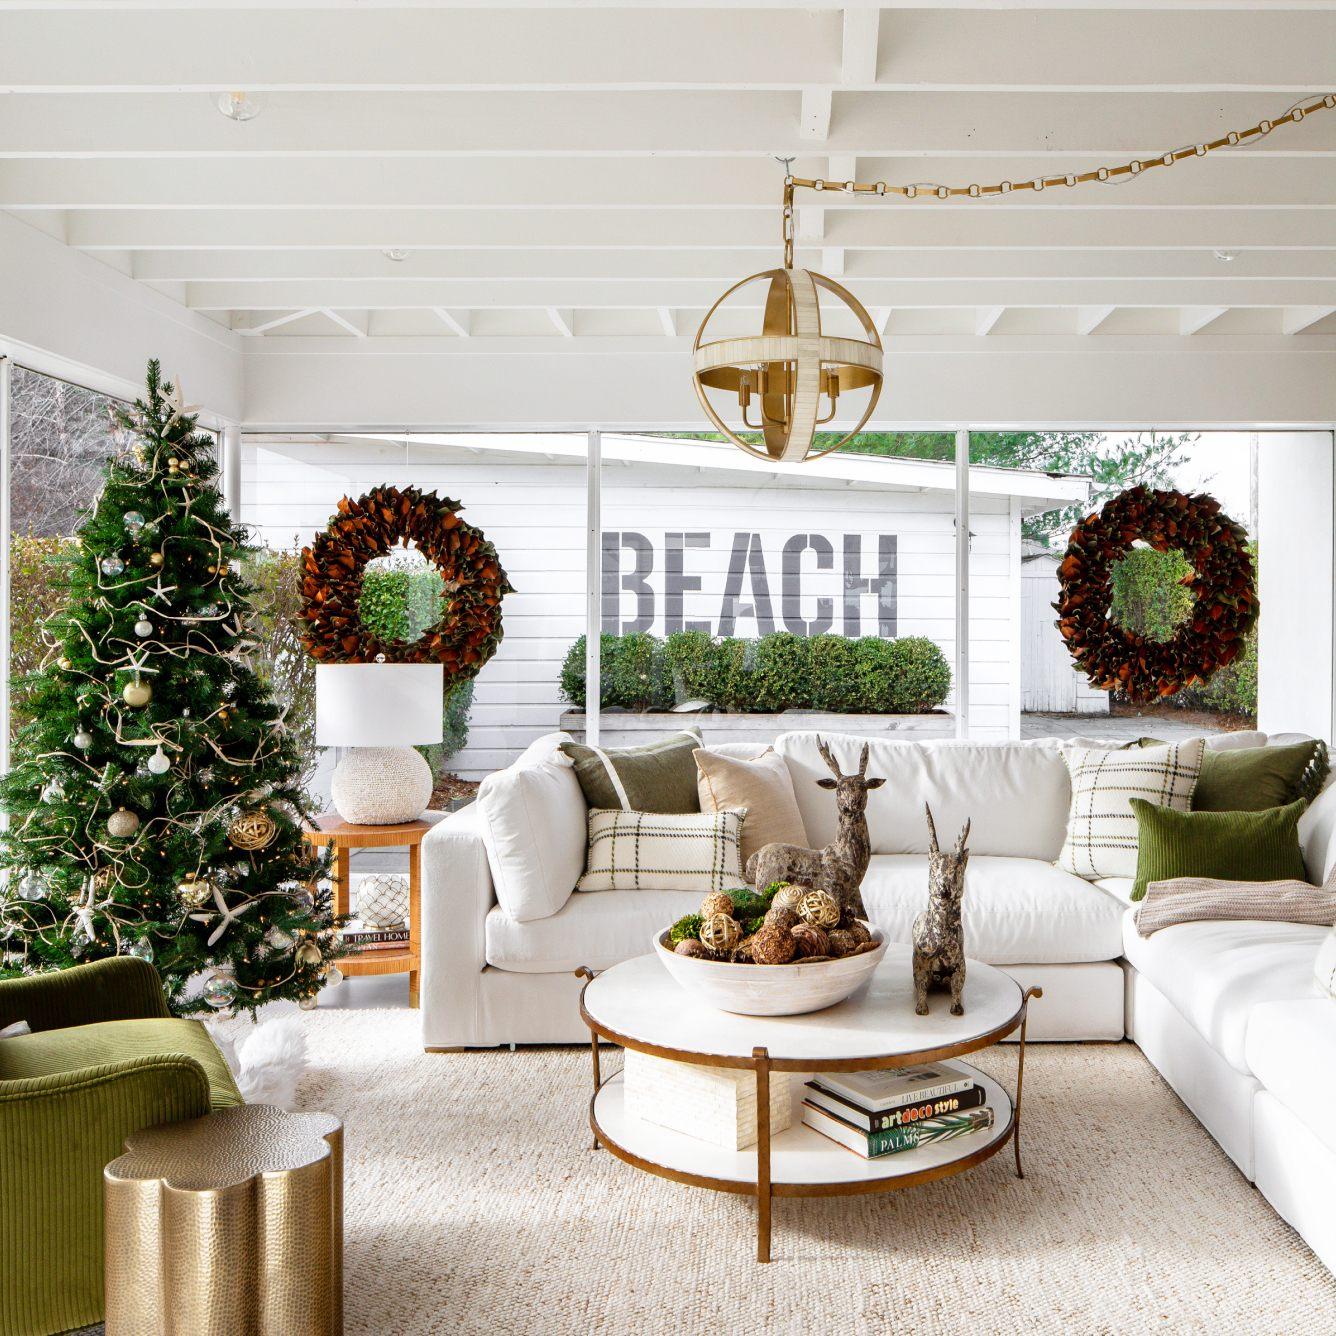 Serena & Lily Holiday House 2022: Shop Christmas Decorations